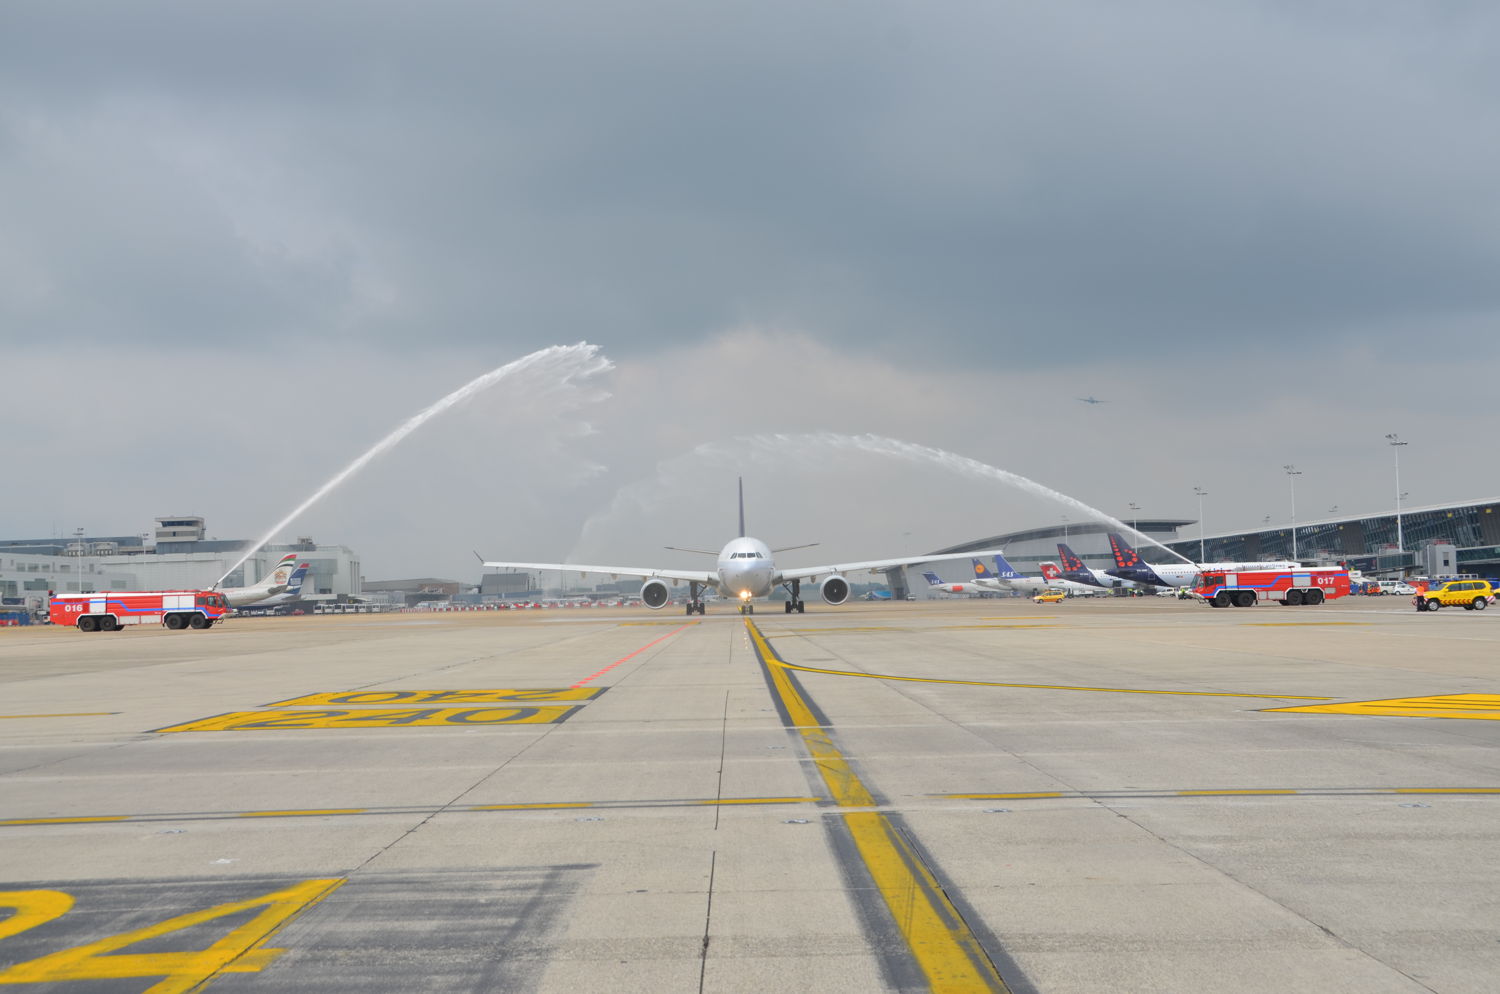 A water salute by the Brussels Airport Fire Department